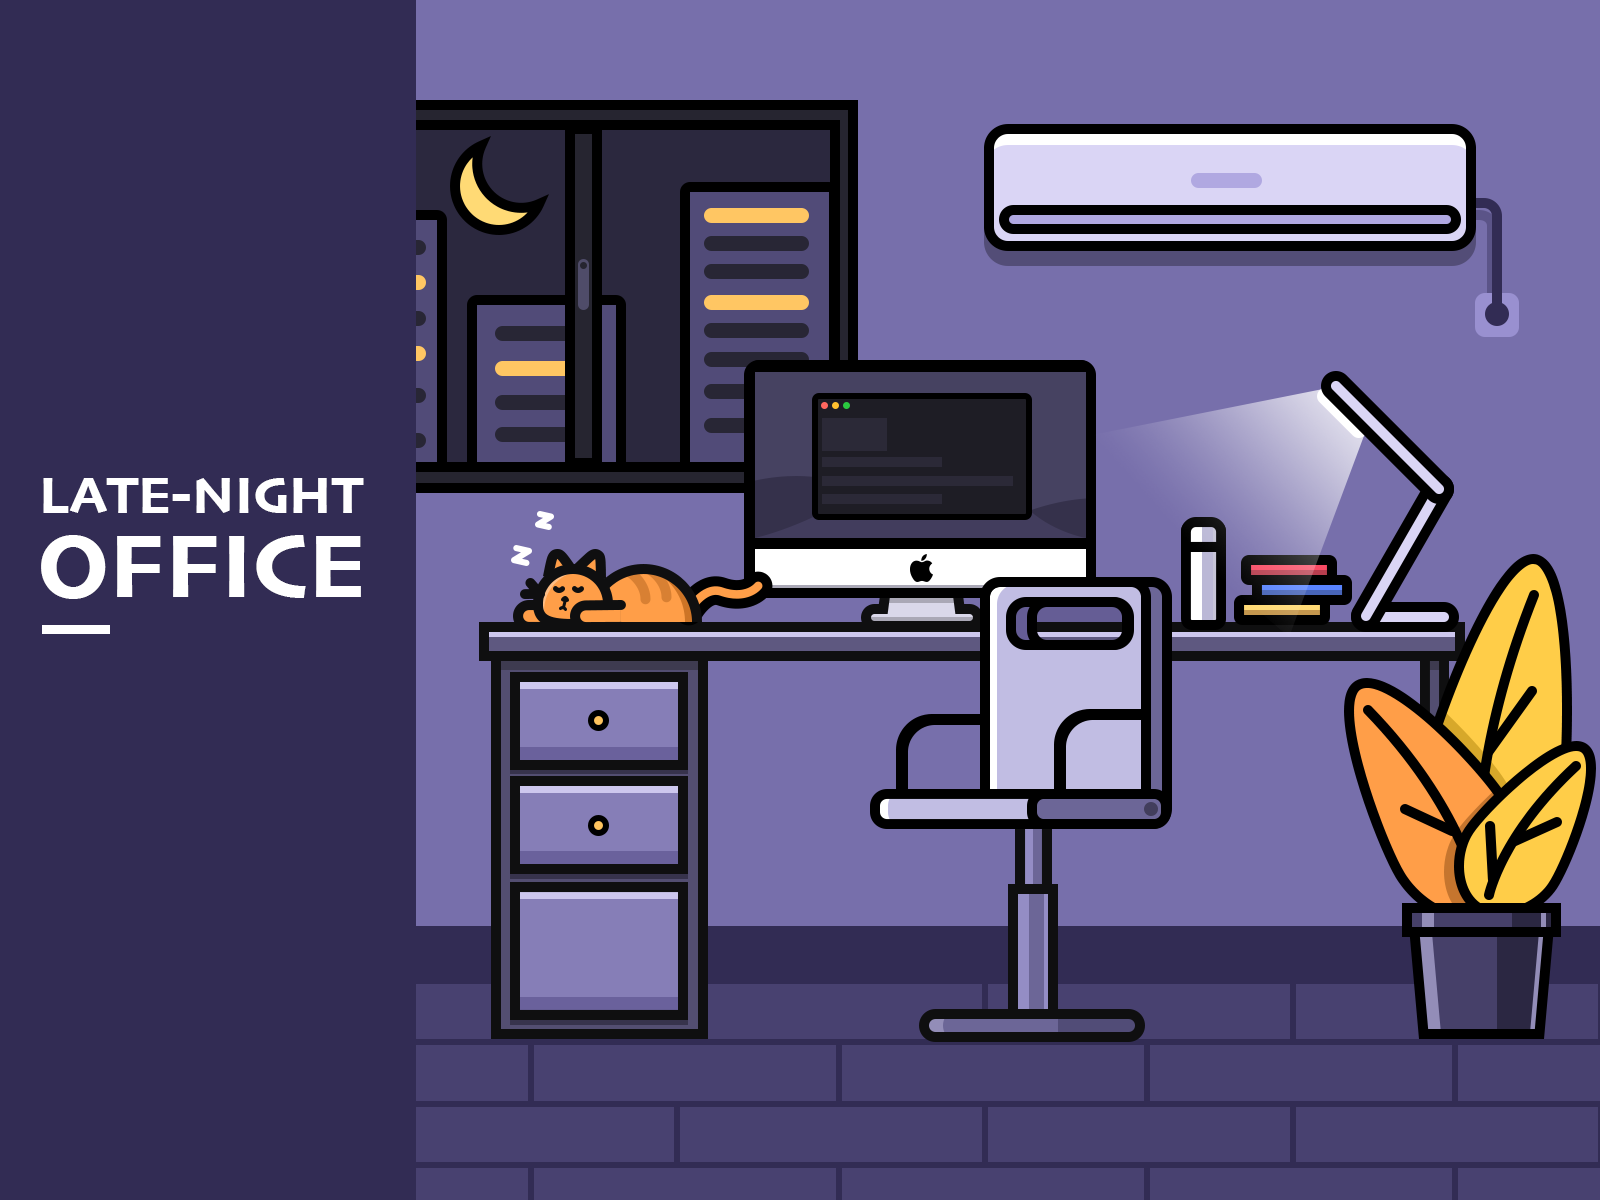 Late night office by Milkbeans on Dribbble